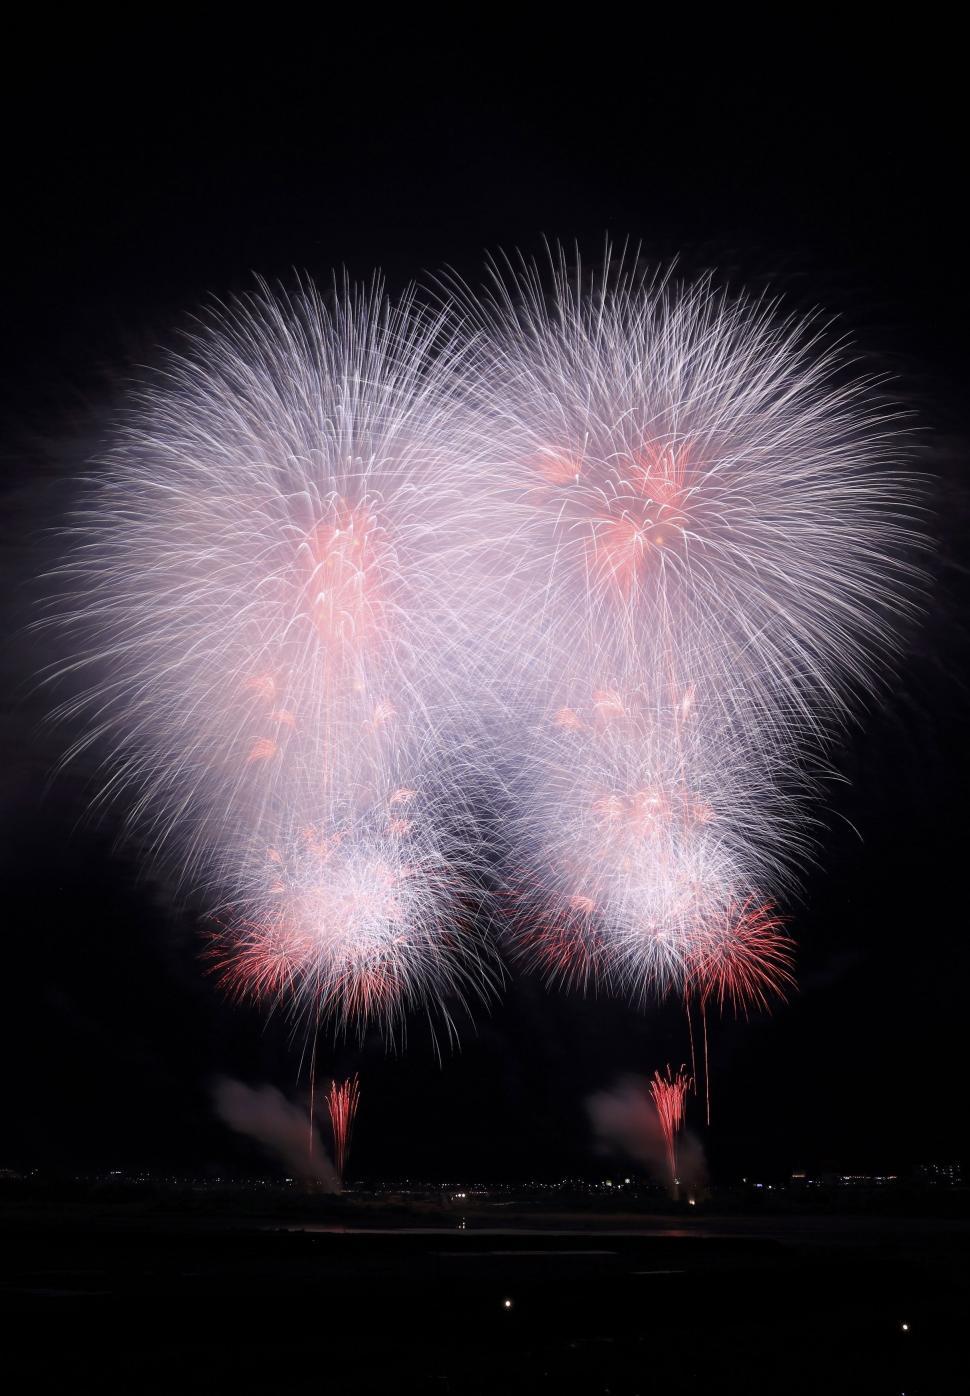 Free Image of Explosive Fireworks Display in the Sky 